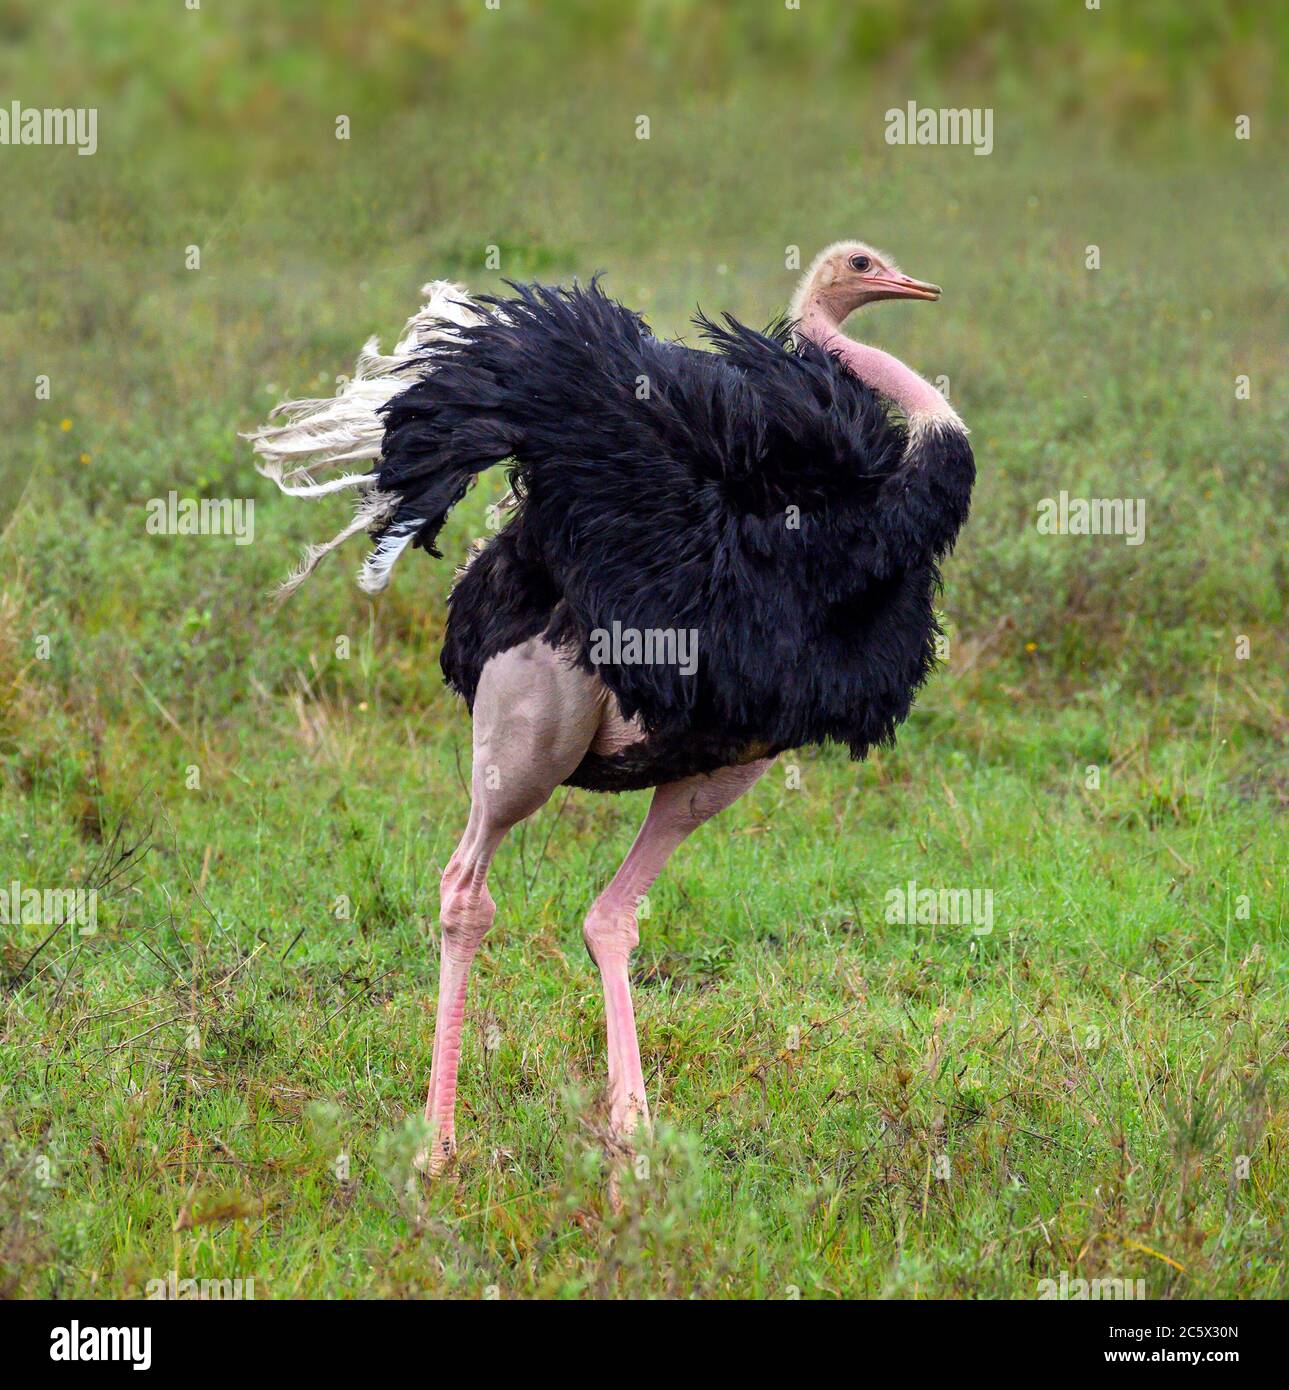 Common Ostrich (Struthio camelus). Male ostrich performing a courtship dance, Nairobi National Park, Kenya, East Africa Stock Photo